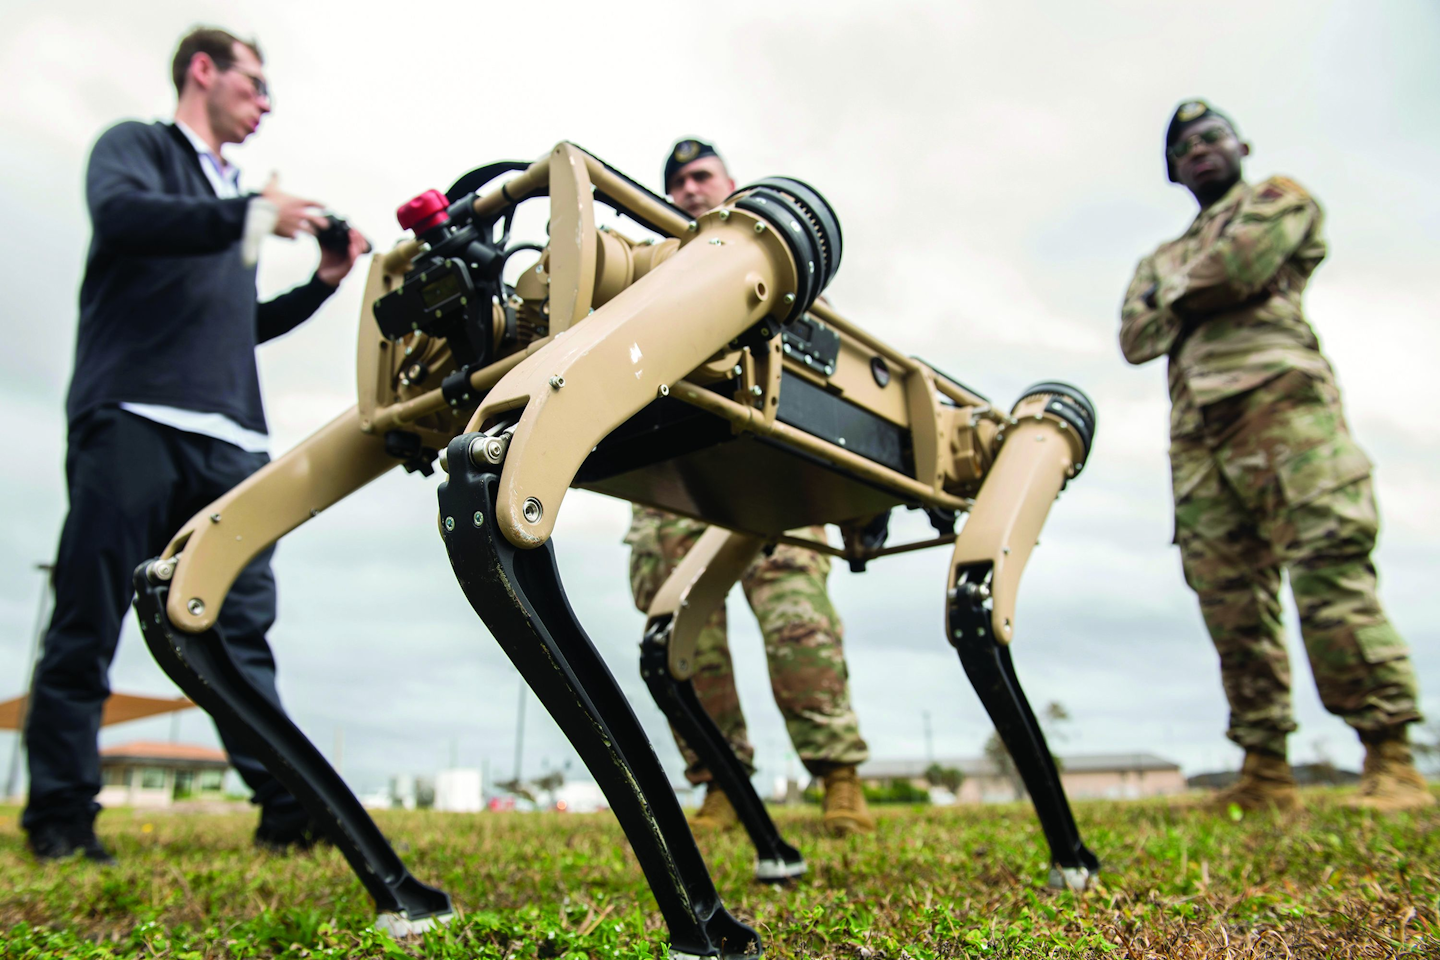 Airmen watch a test of an unmanned ground vehicle at Tyndall Air Force Base, Fla., as part of a plan to use the “computerized canines” to aid in reconnaissance and enhanced security patrolling operations across the base.